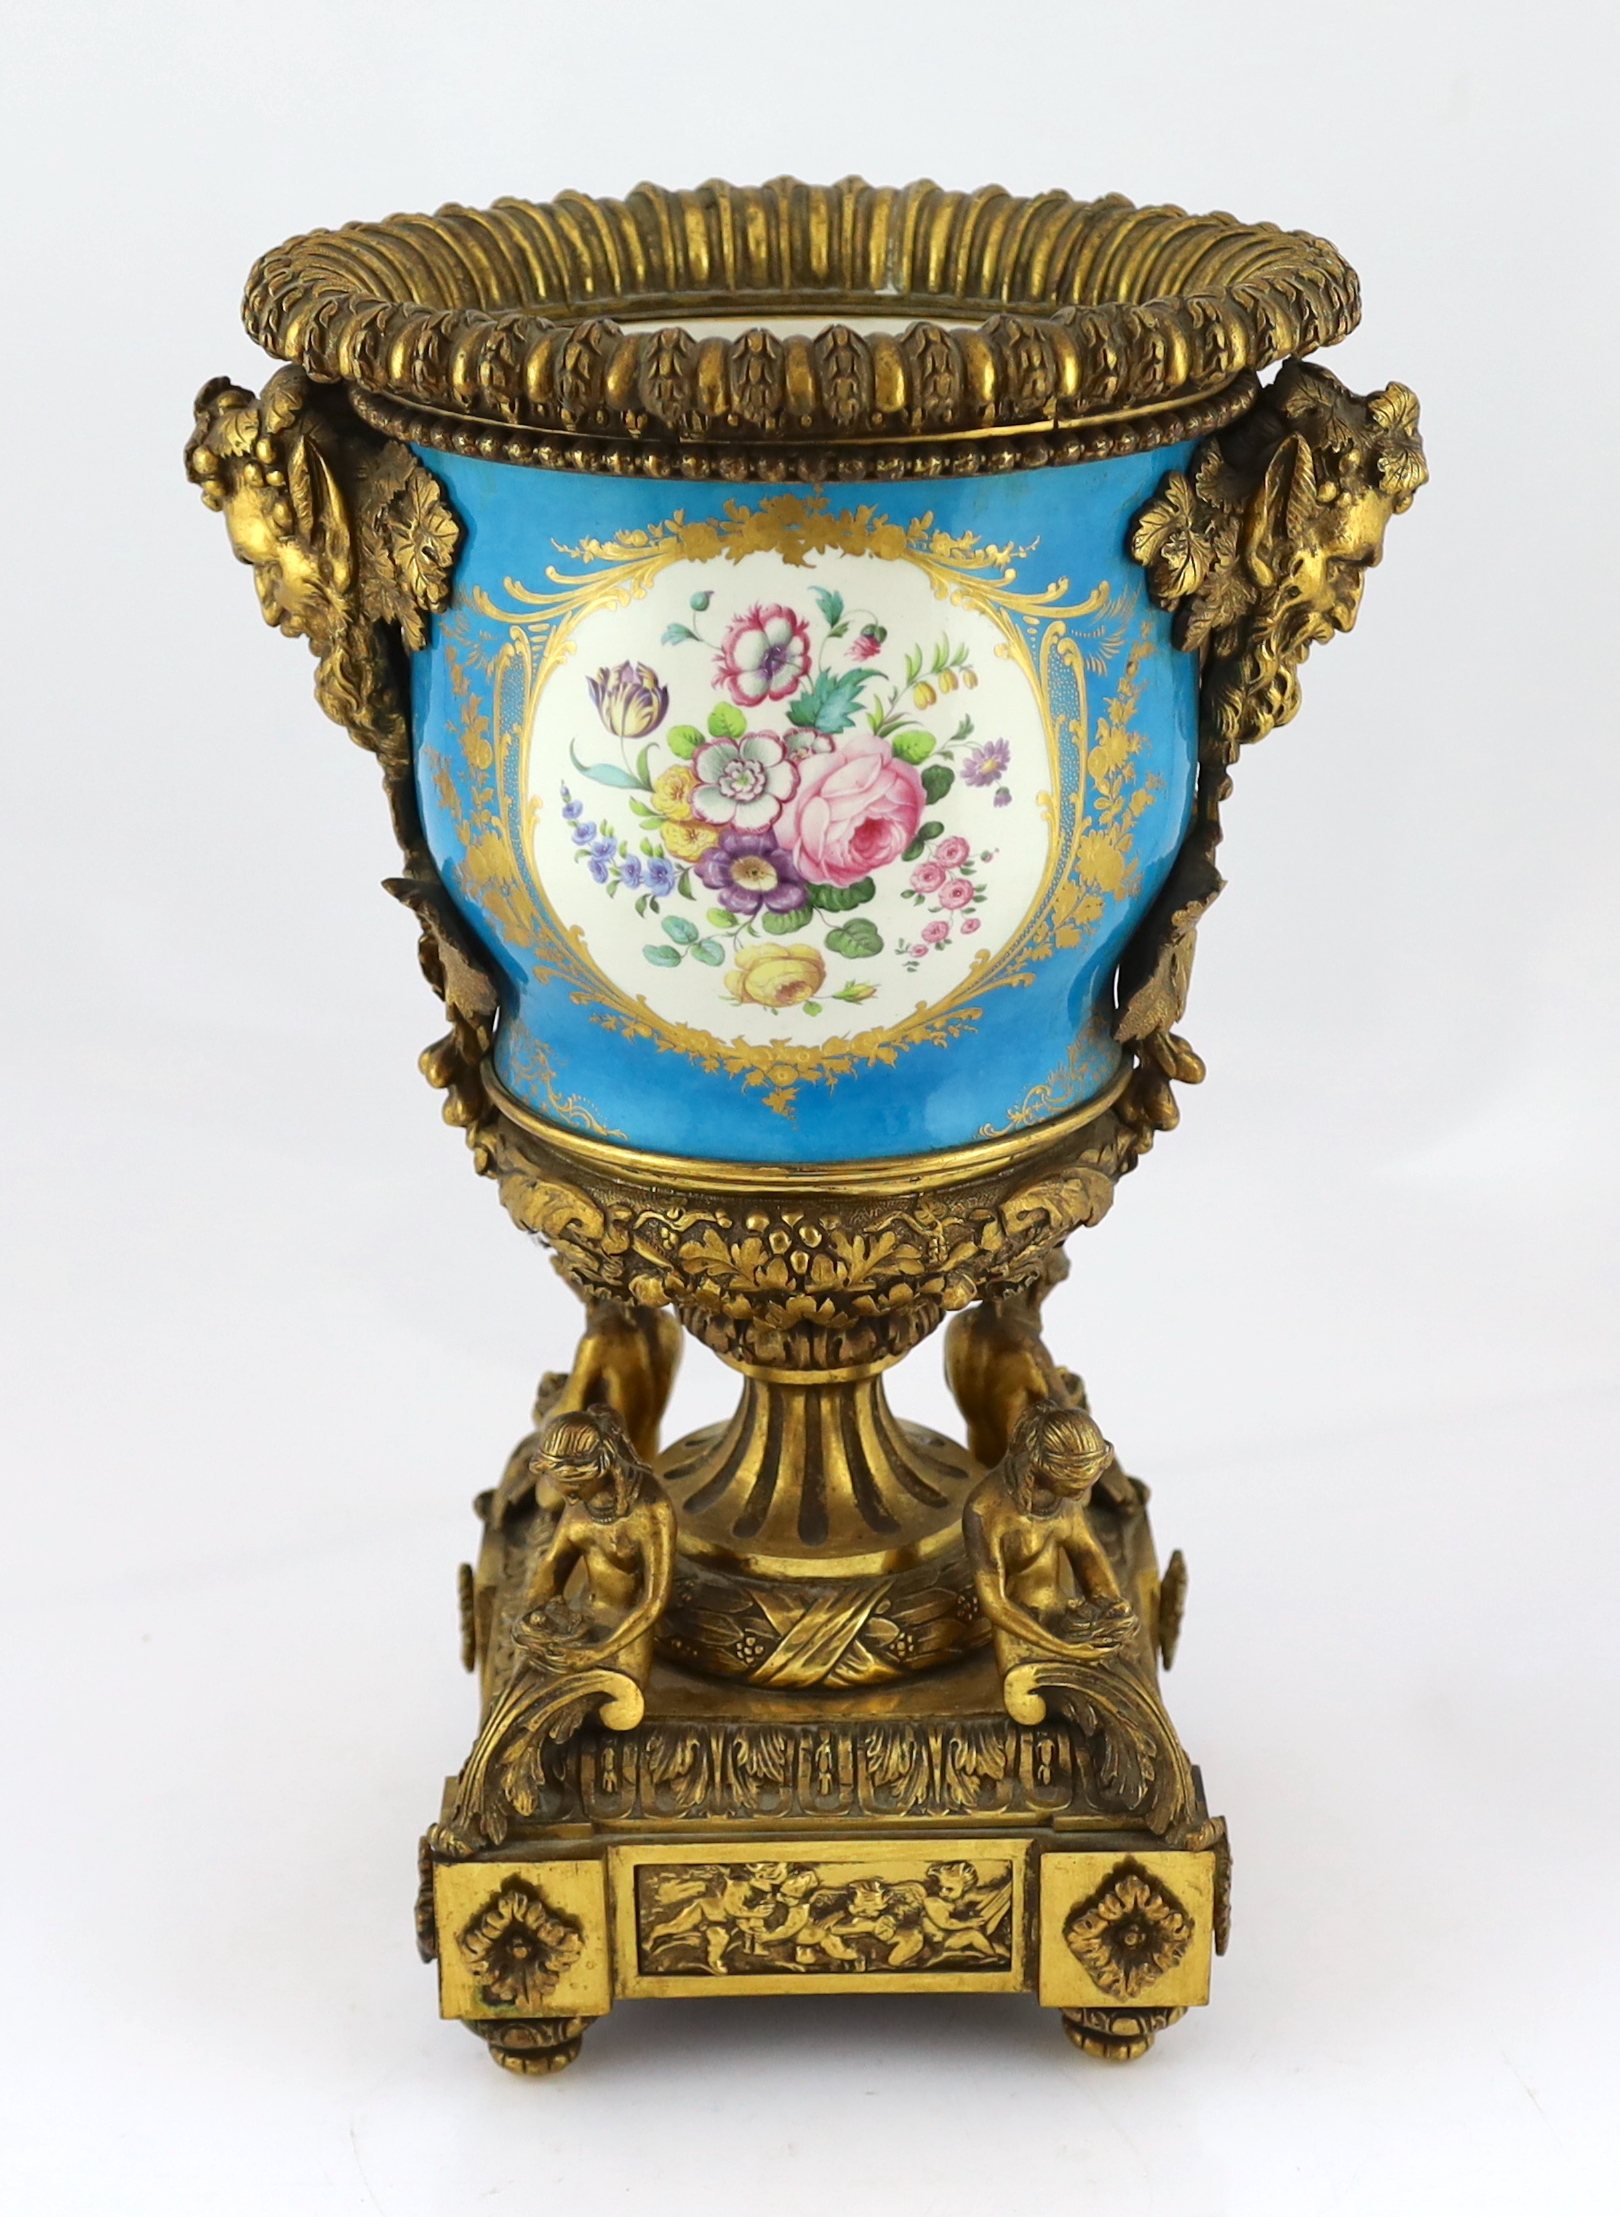 An impressive French Sevres style porcelain and ormolu mounted pedestal vase, 19th century